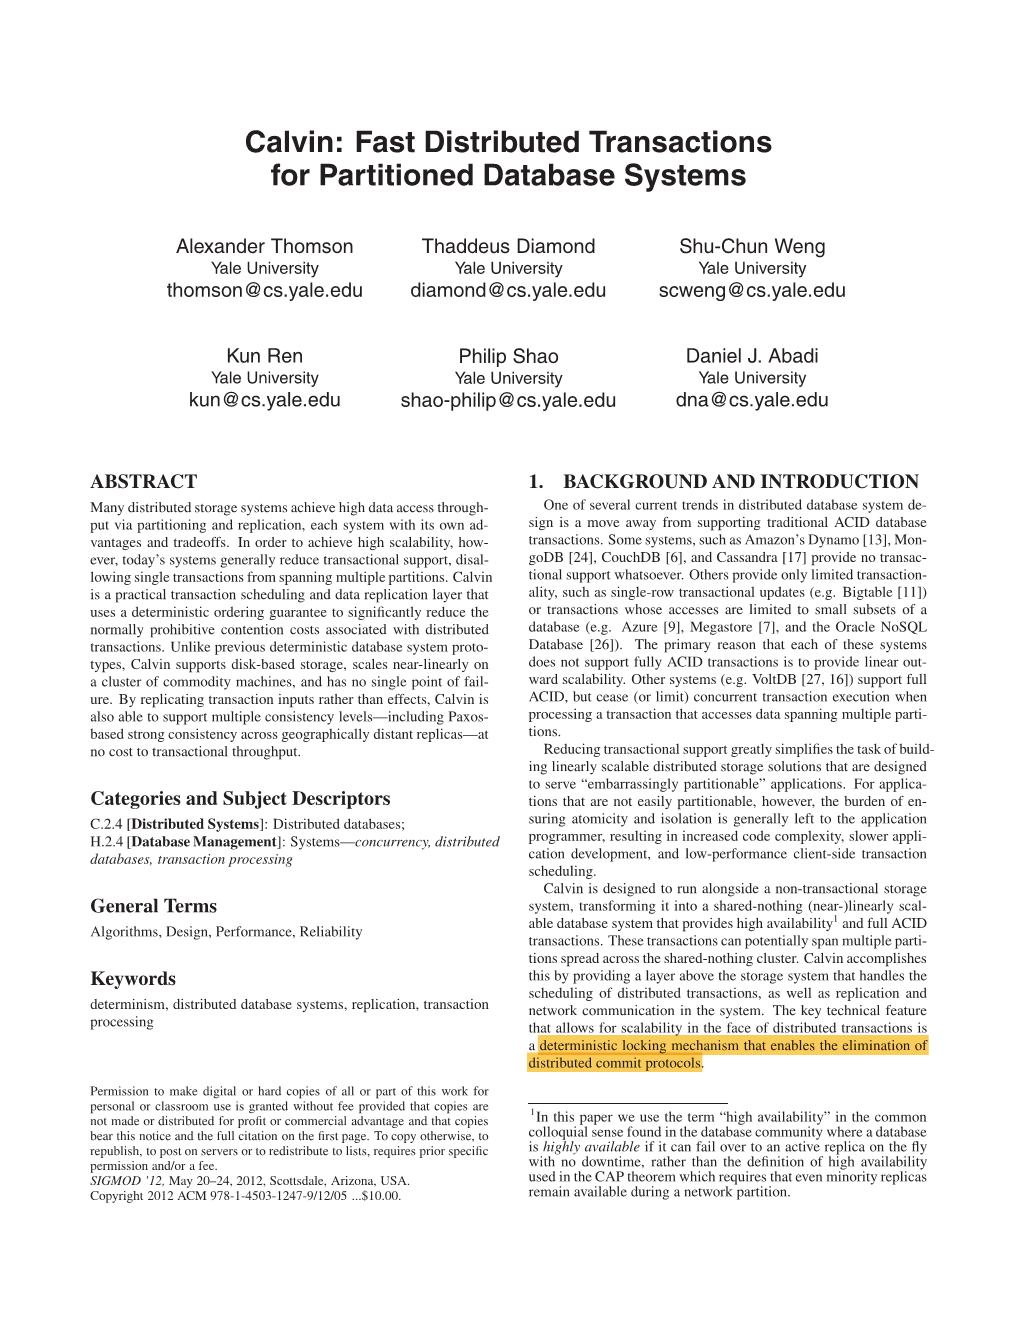 Calvin: Fast Distributed Transactions for Partitioned Database Systems